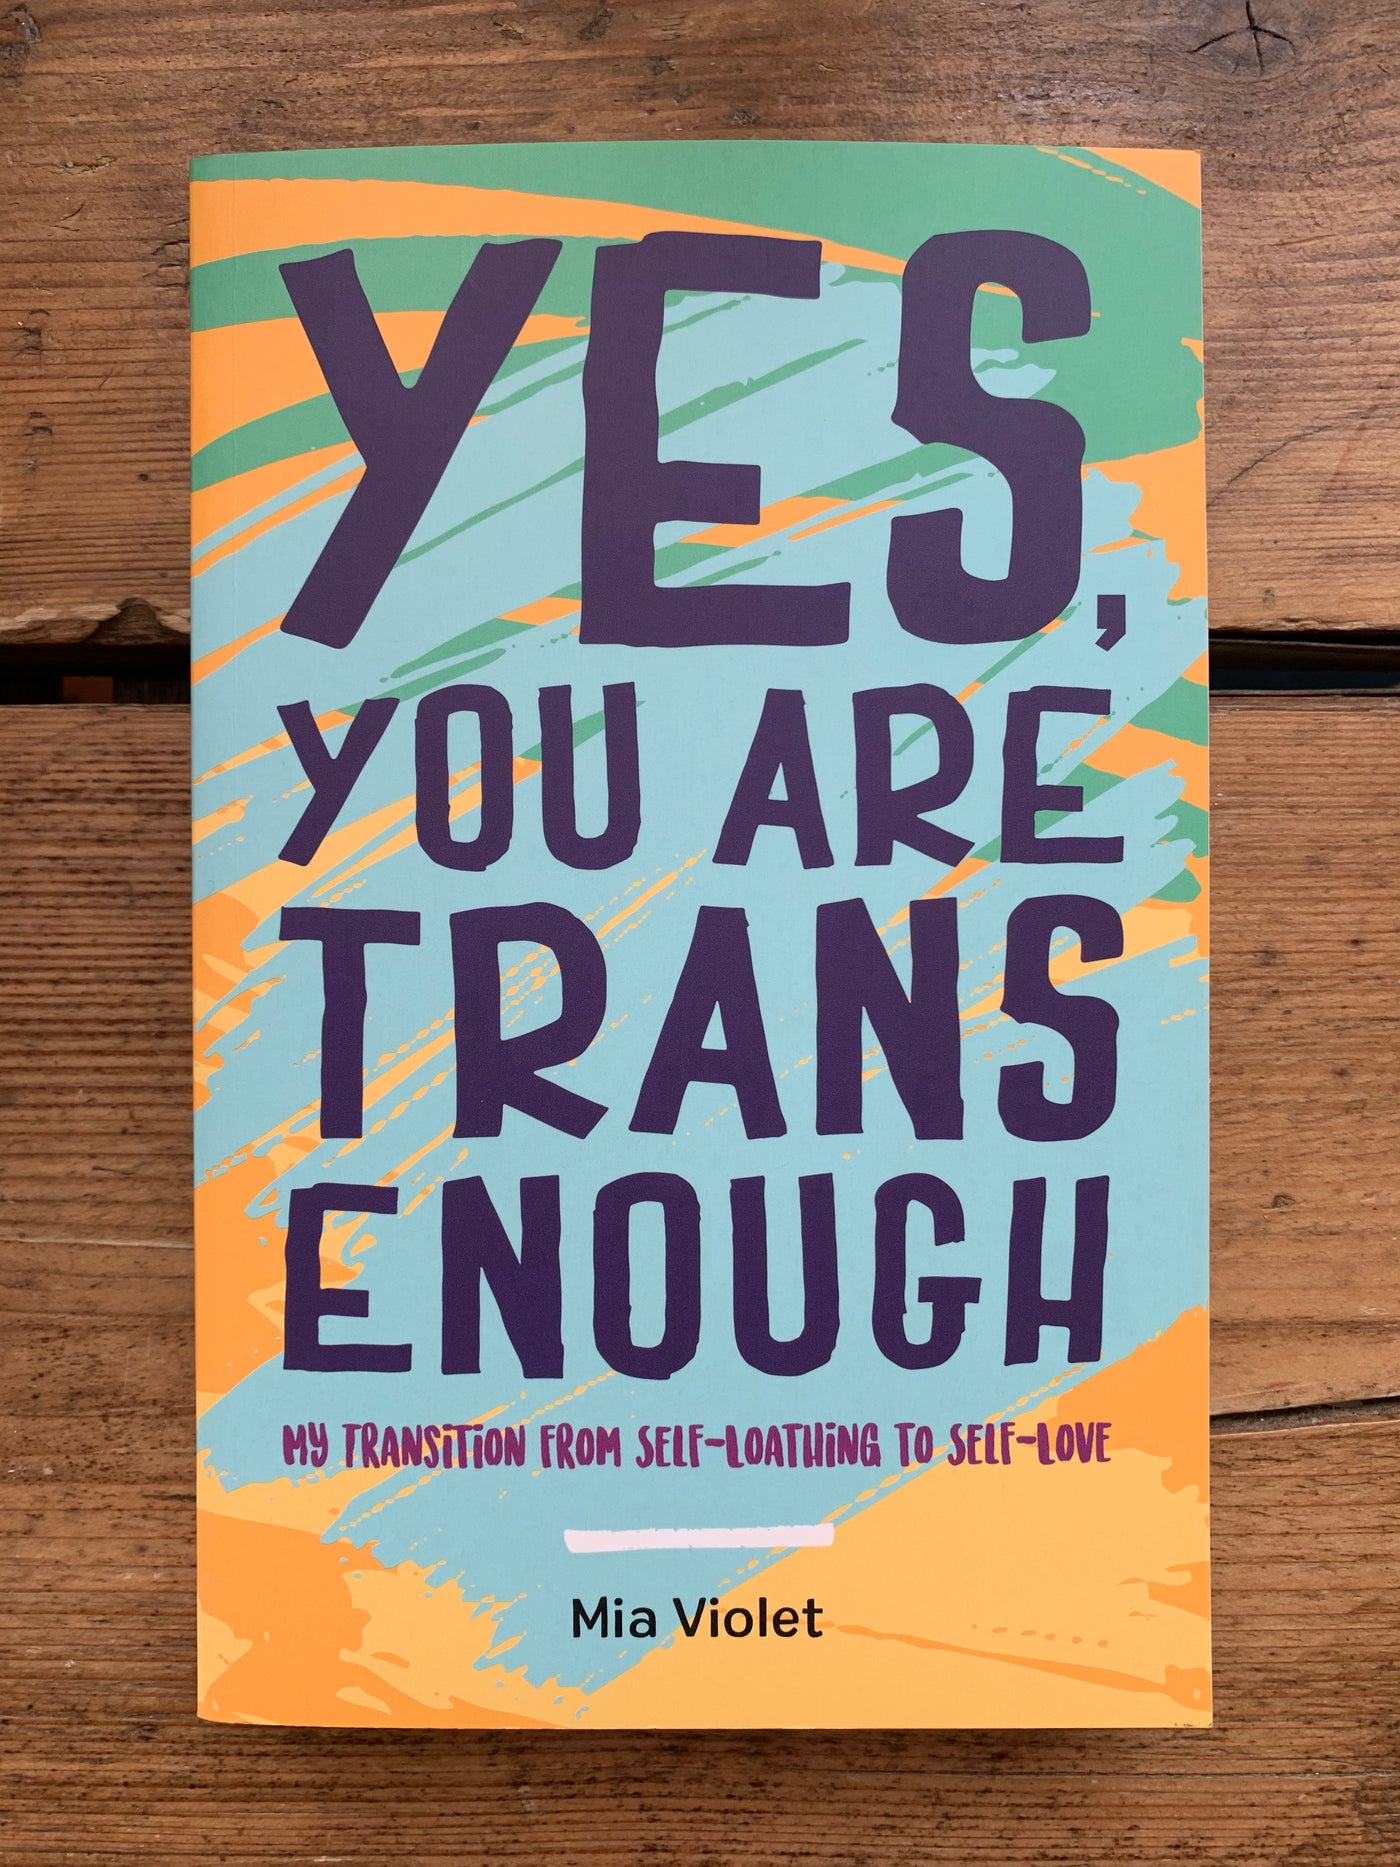 Yes, You Are Trans Enough